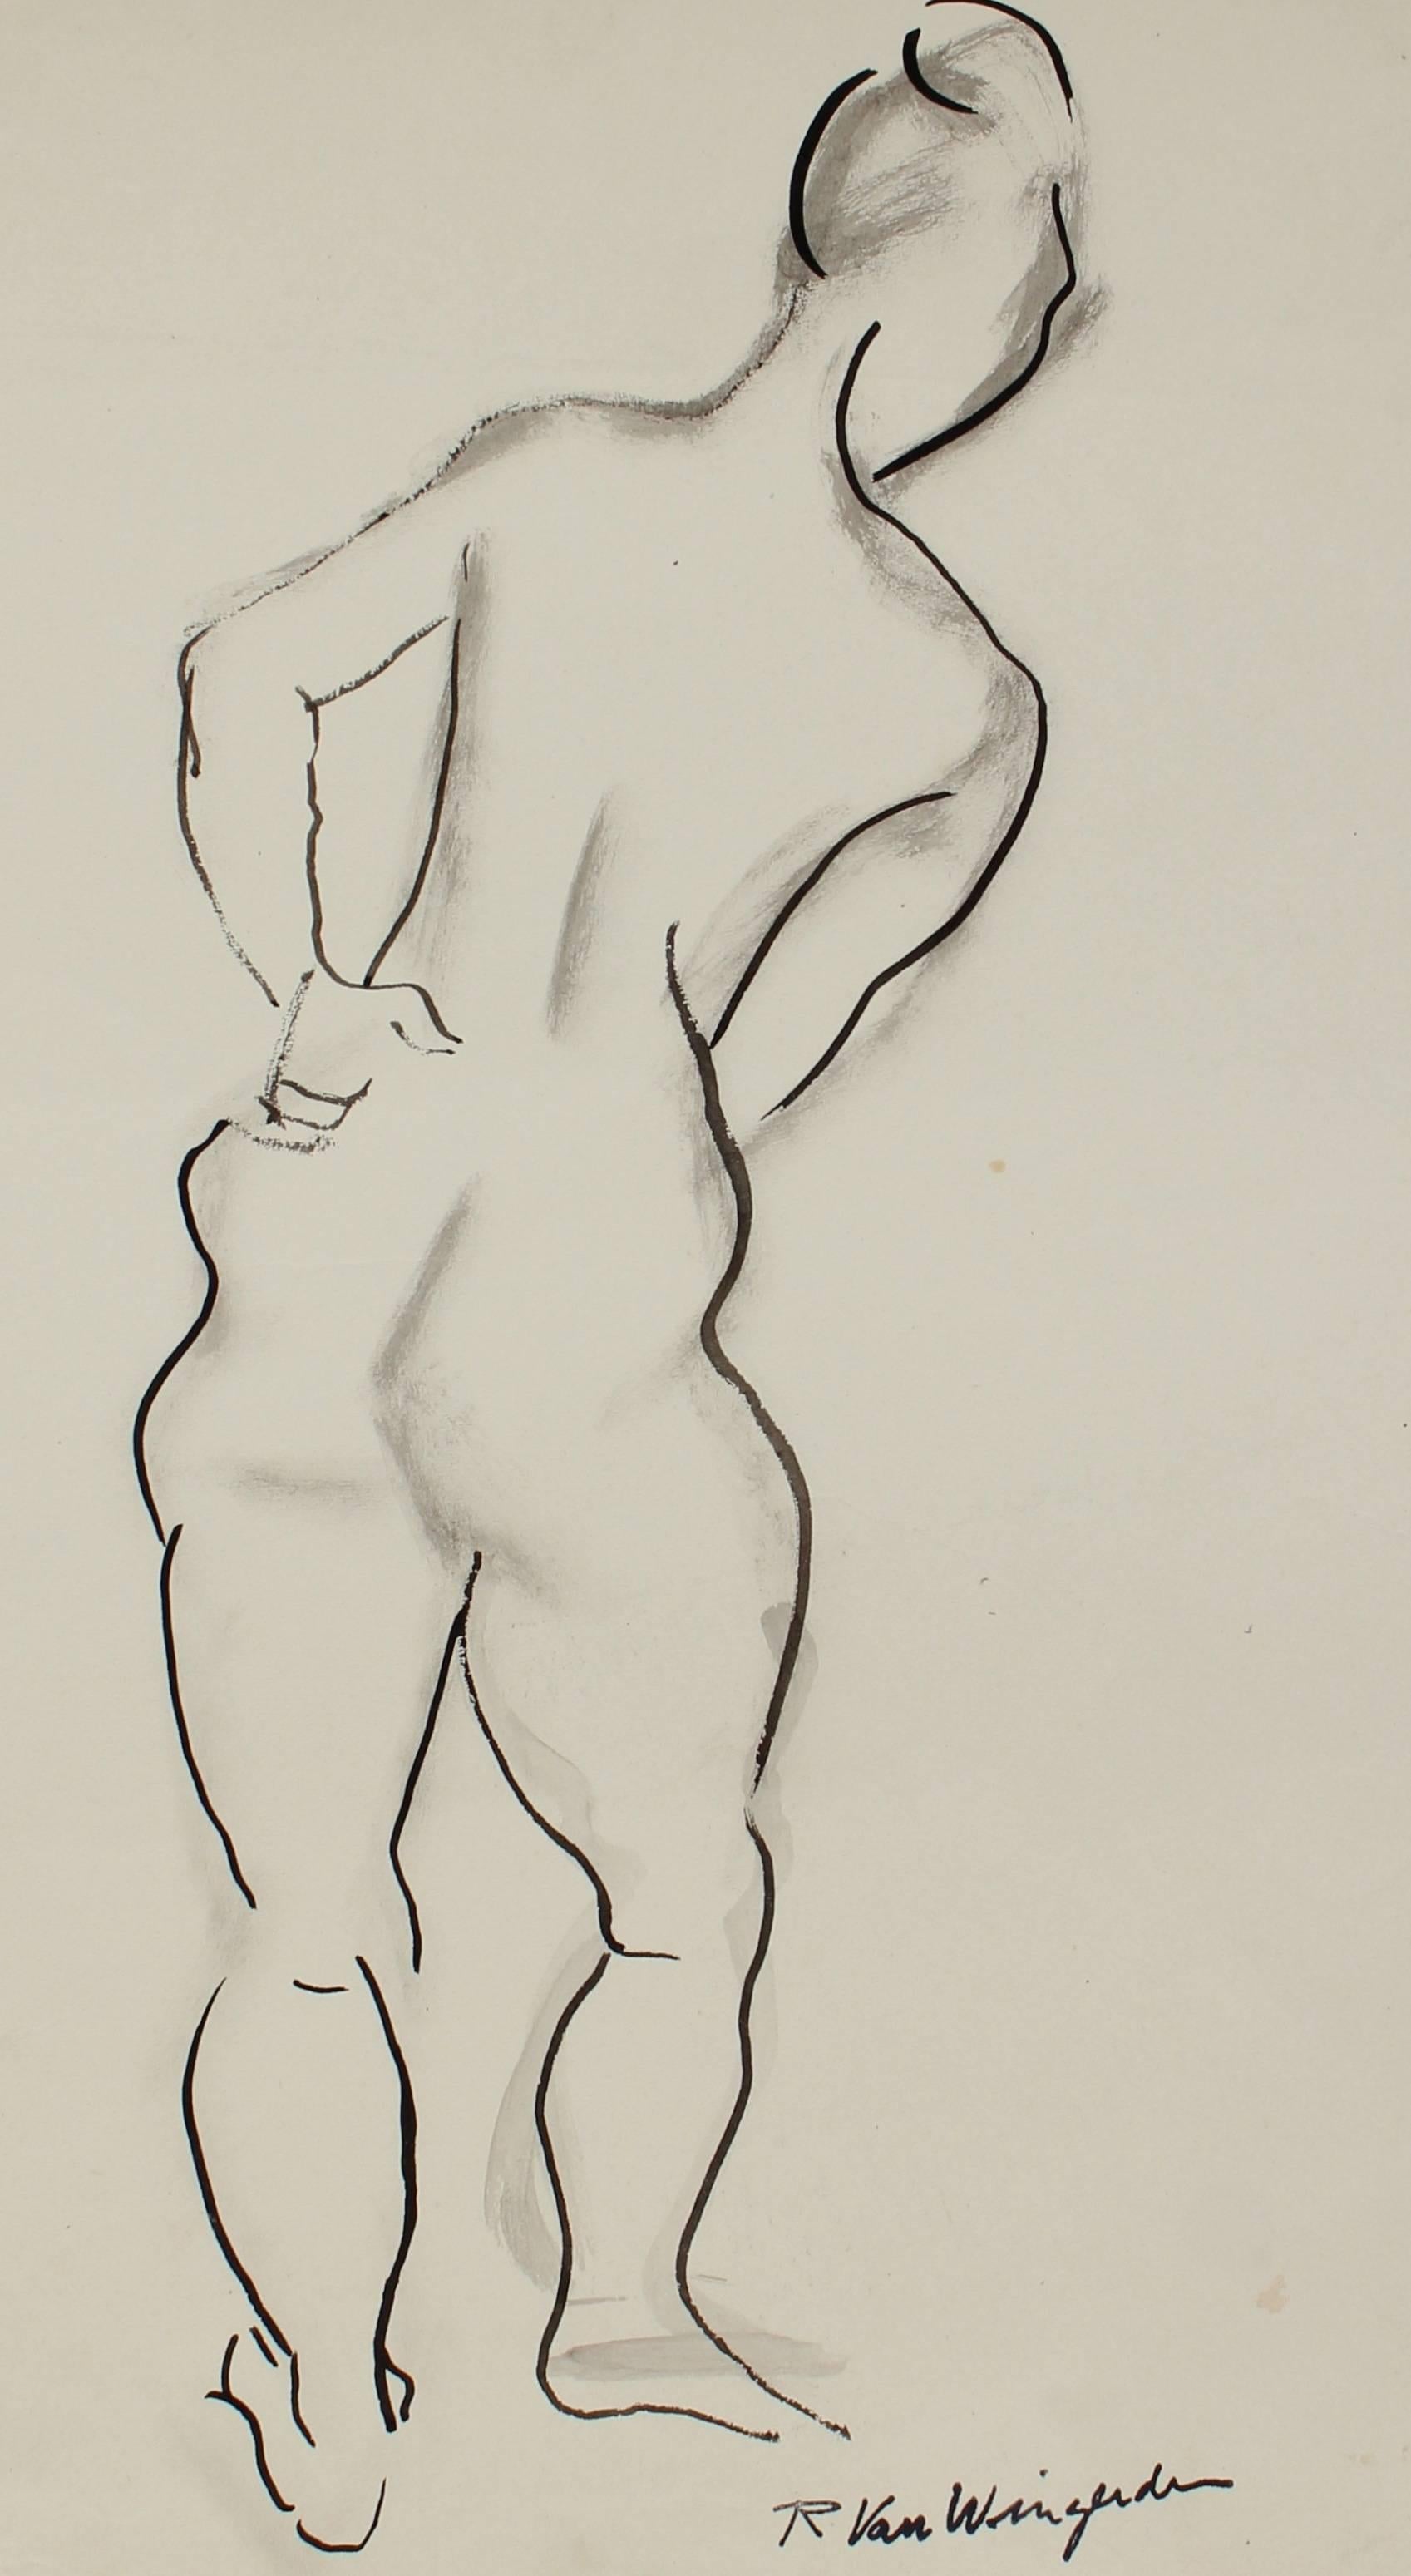 Expressionist Nude Figure in Ink, Circa 1950s